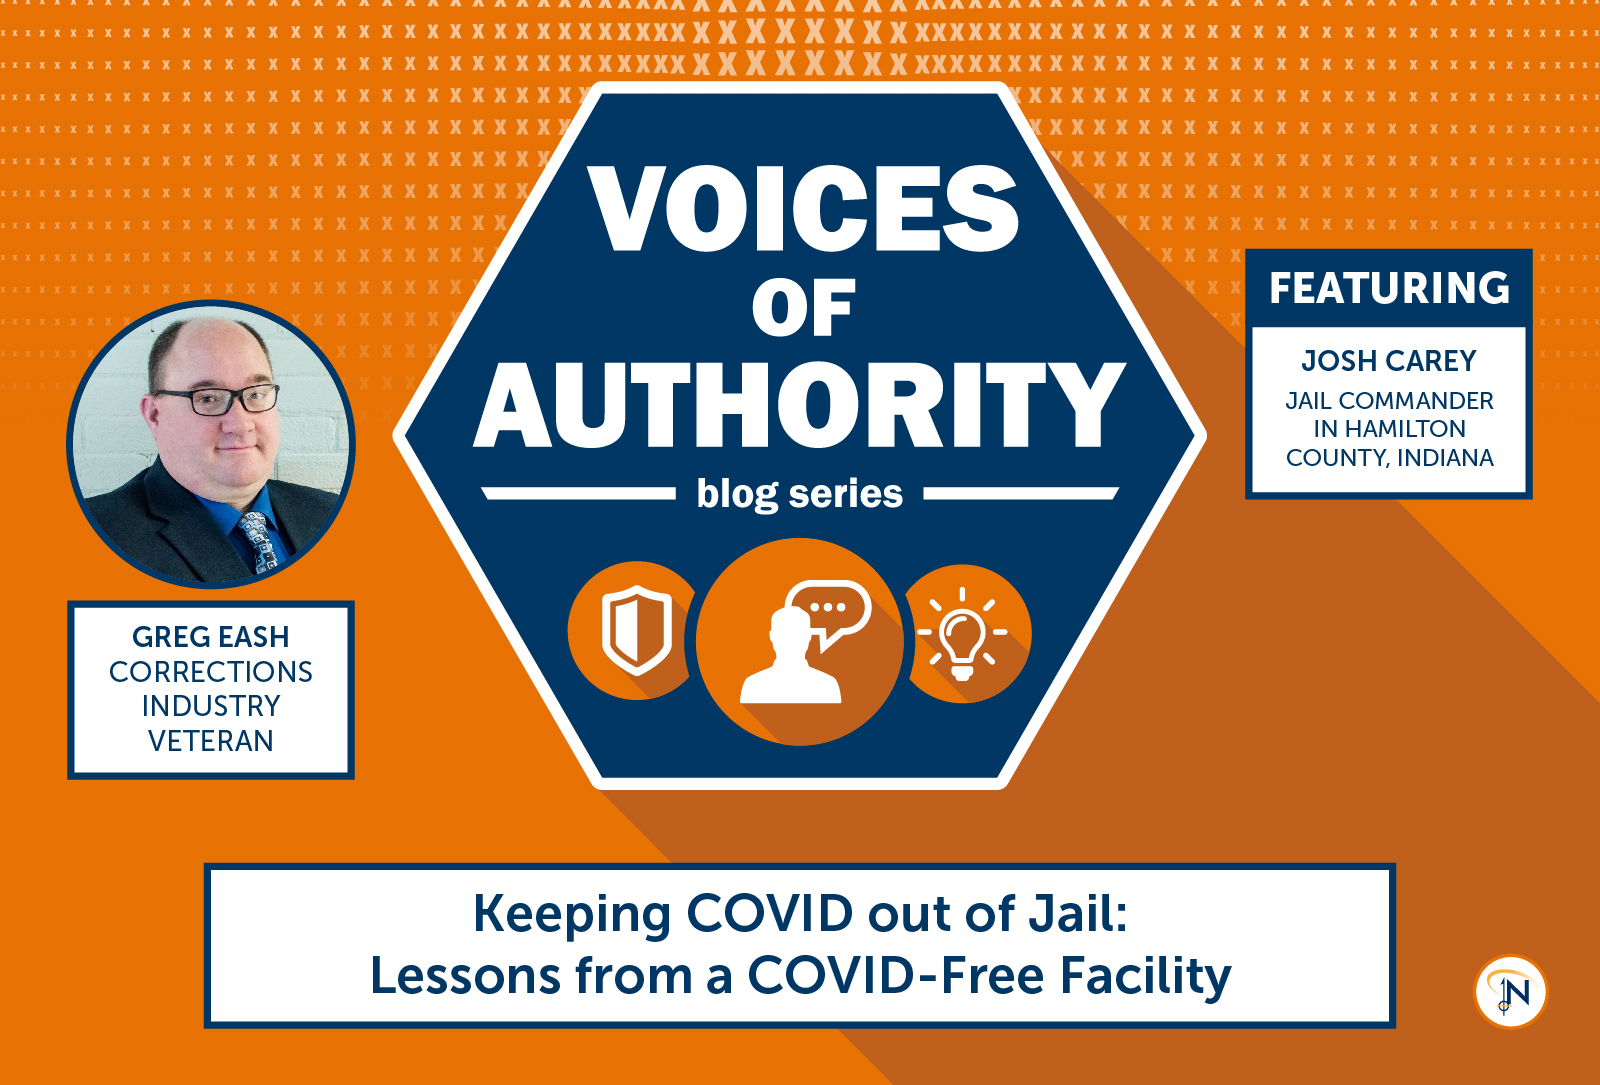 Voices of Authority blog series: Keeping COVID out of Jail: Lessons from a COVID-Free Facility